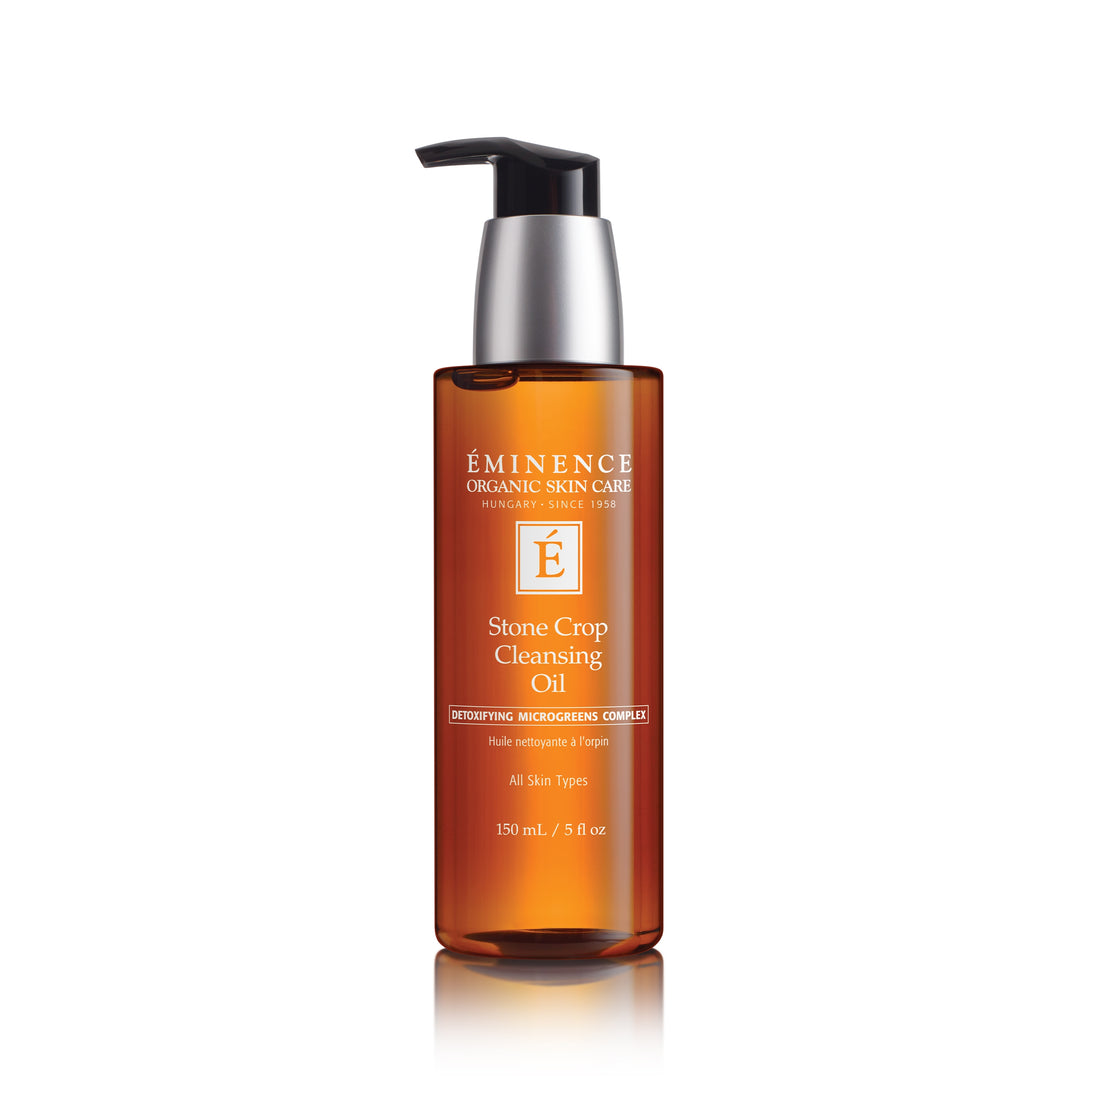 Stone Crop Cleansing Oil | Restore balance and removes impurities